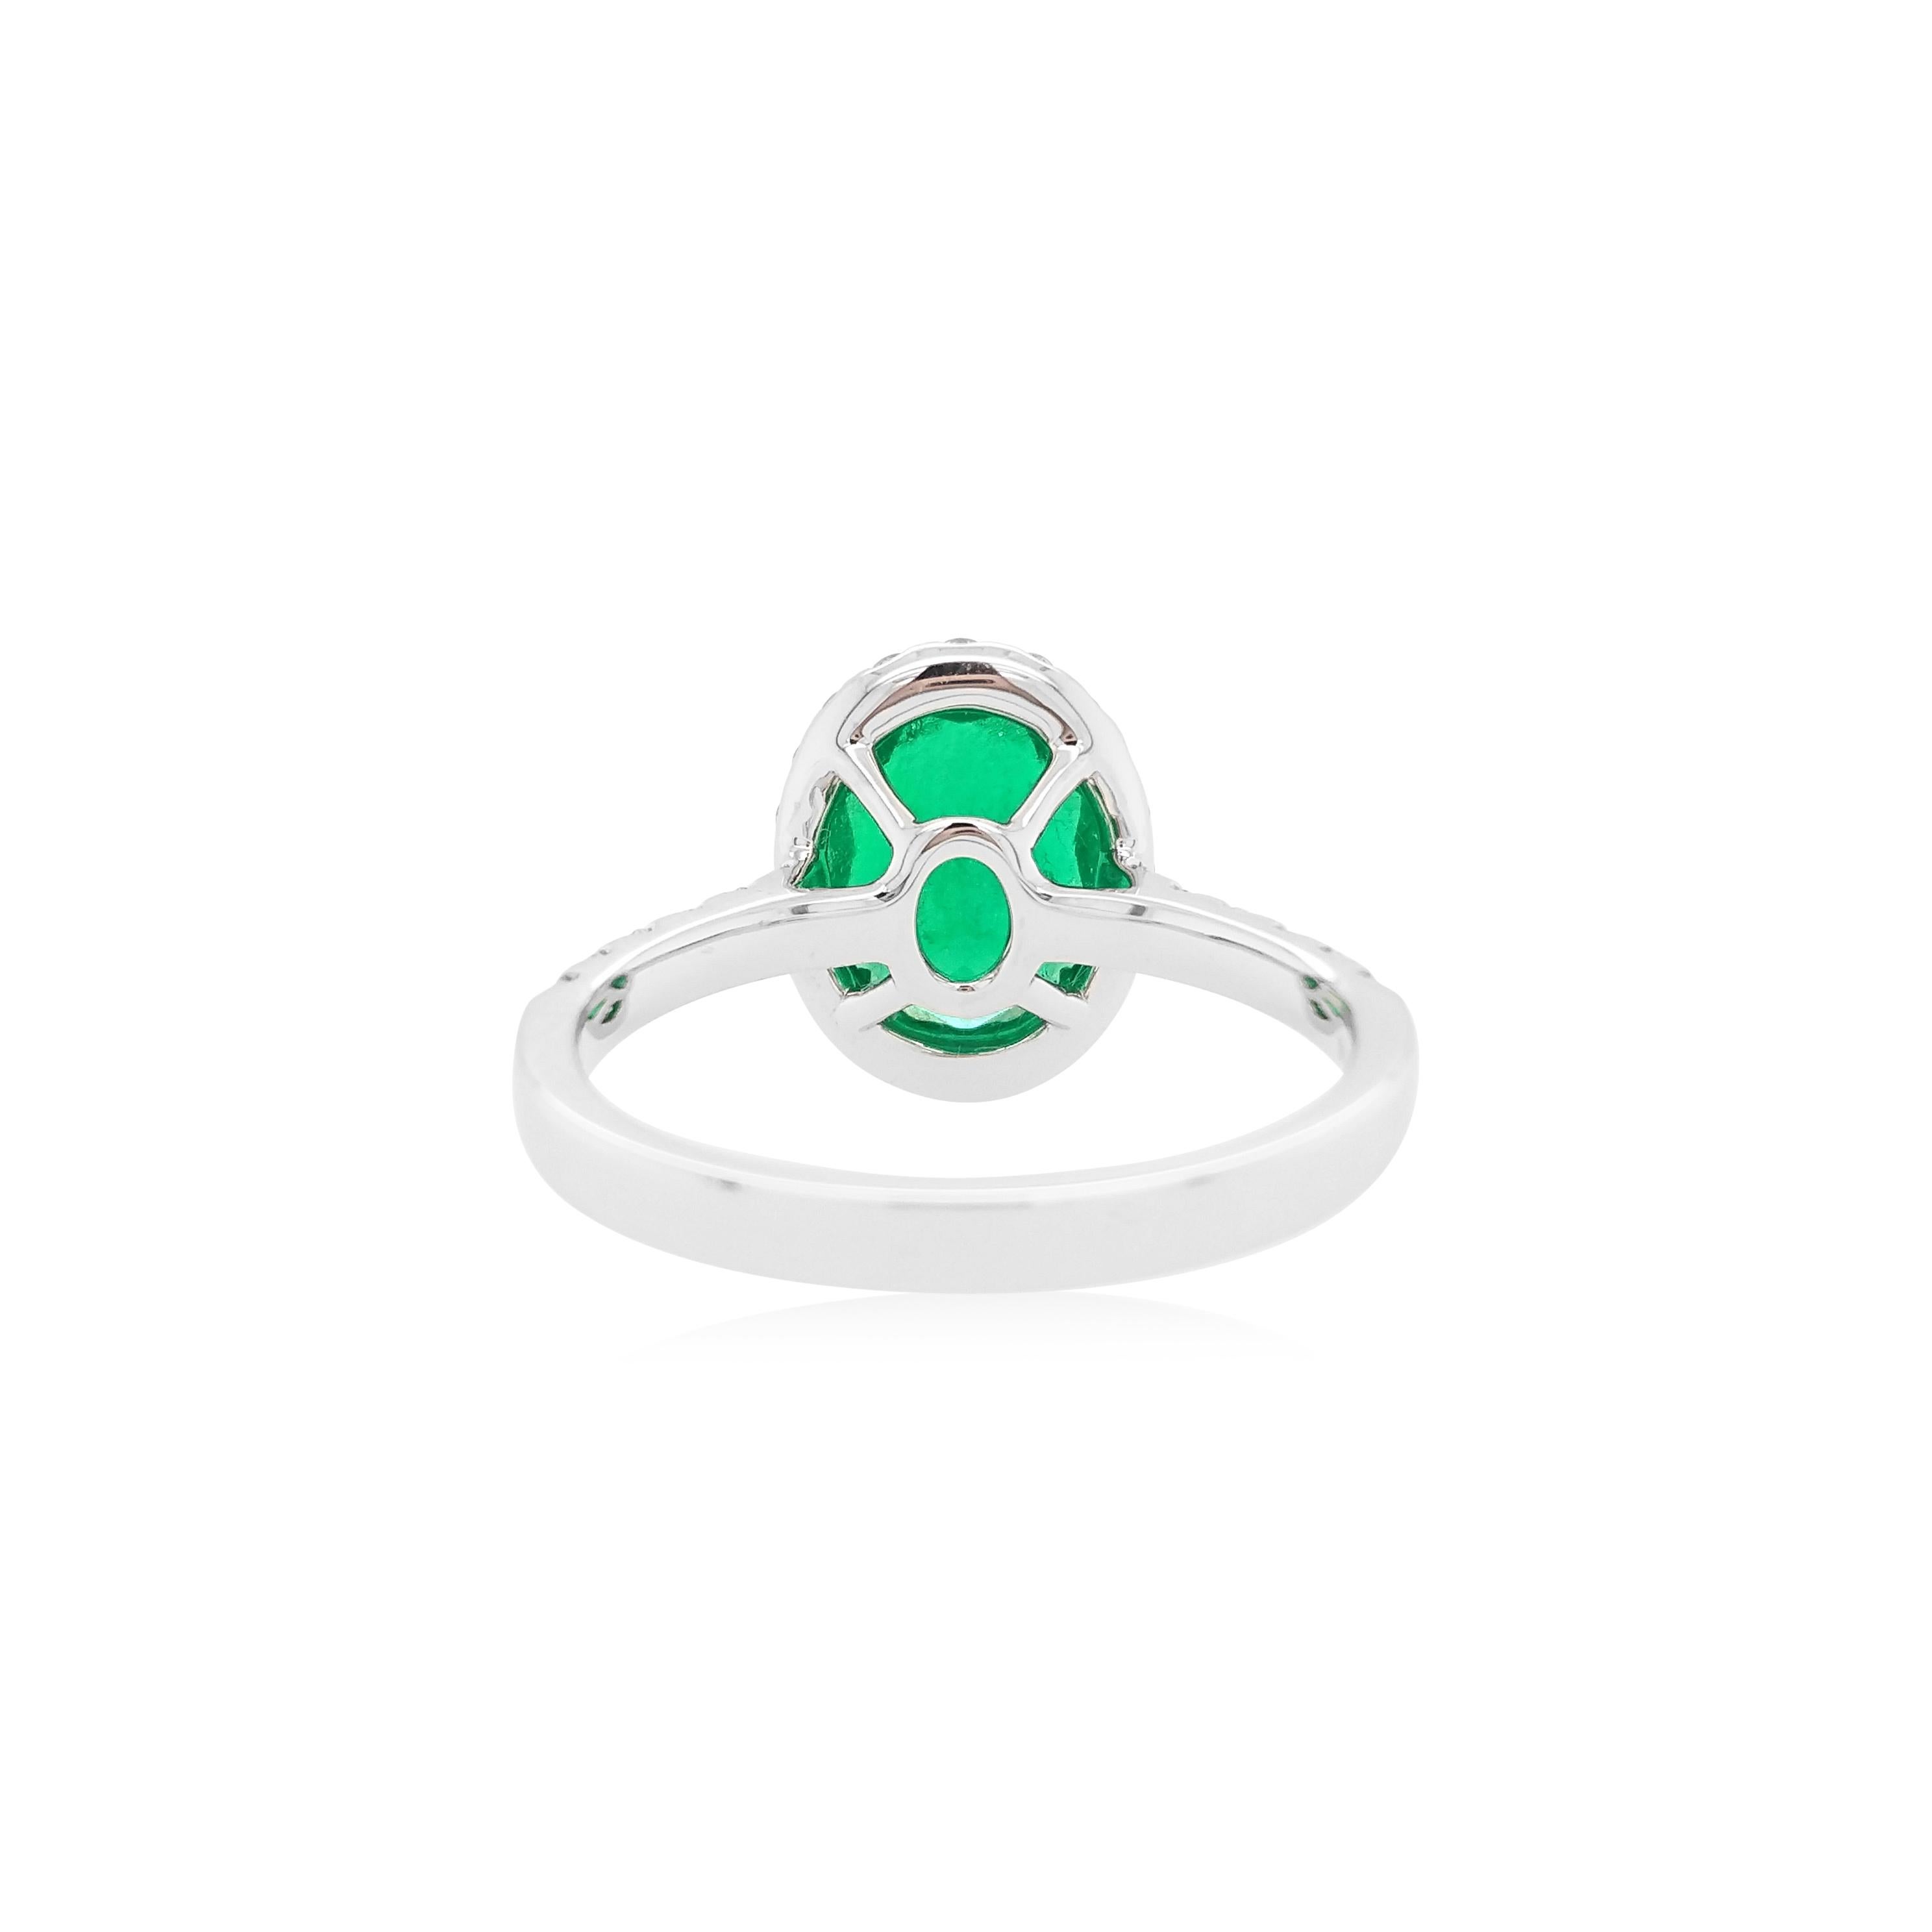 This elegant ring features a lustrous Oval Shape Colombian Emerald at its centre, with a delicate white diamond halo surrounding it. Set in 18 Karat white gold to enrich the spectacular hues of the Emerald and the sparkle of the diamonds, this ring